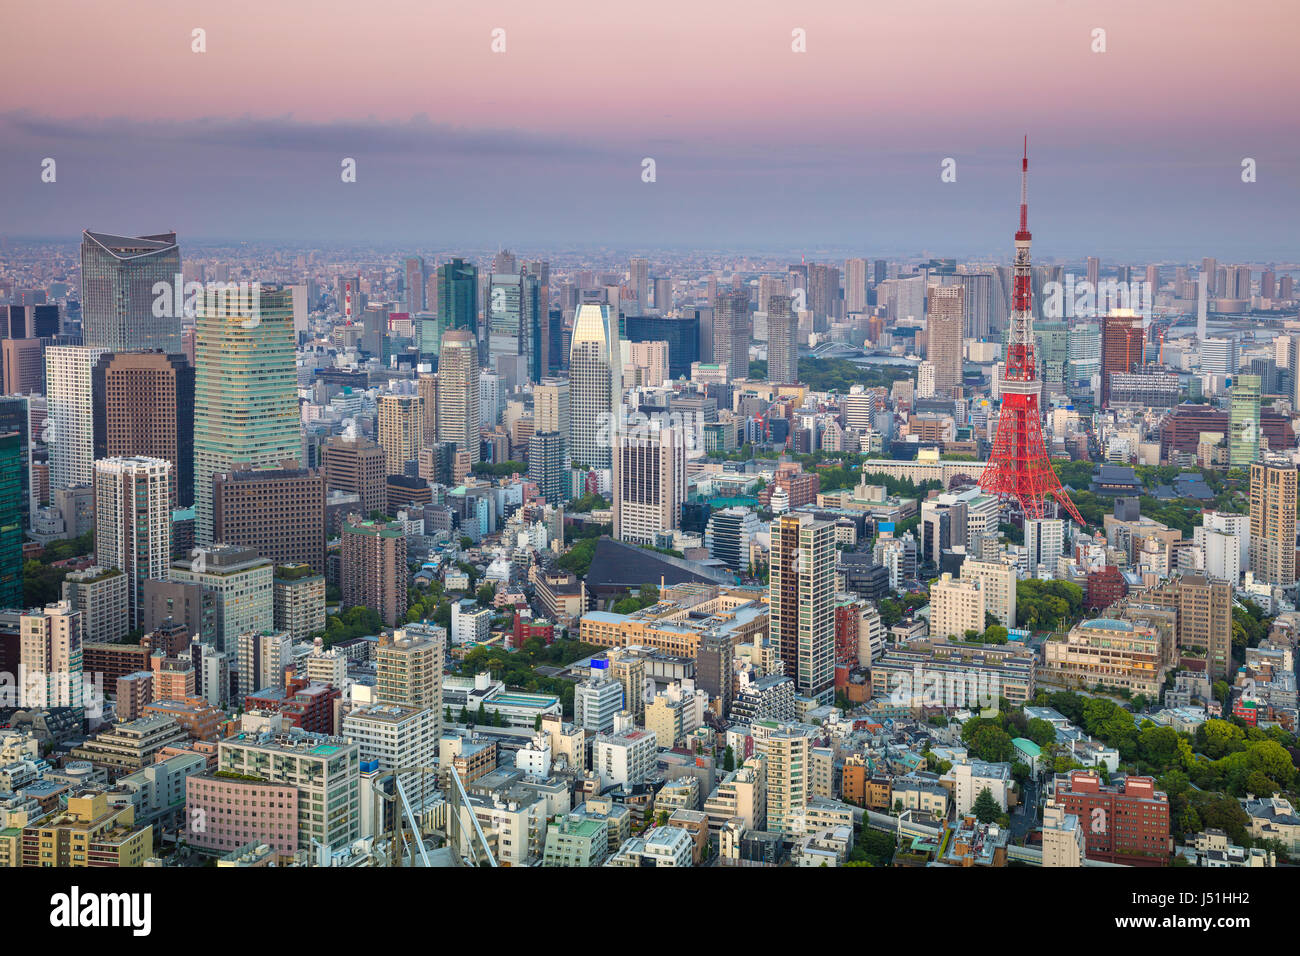 Cityscape image of Tokyo, Japan during sunset Stock Photo